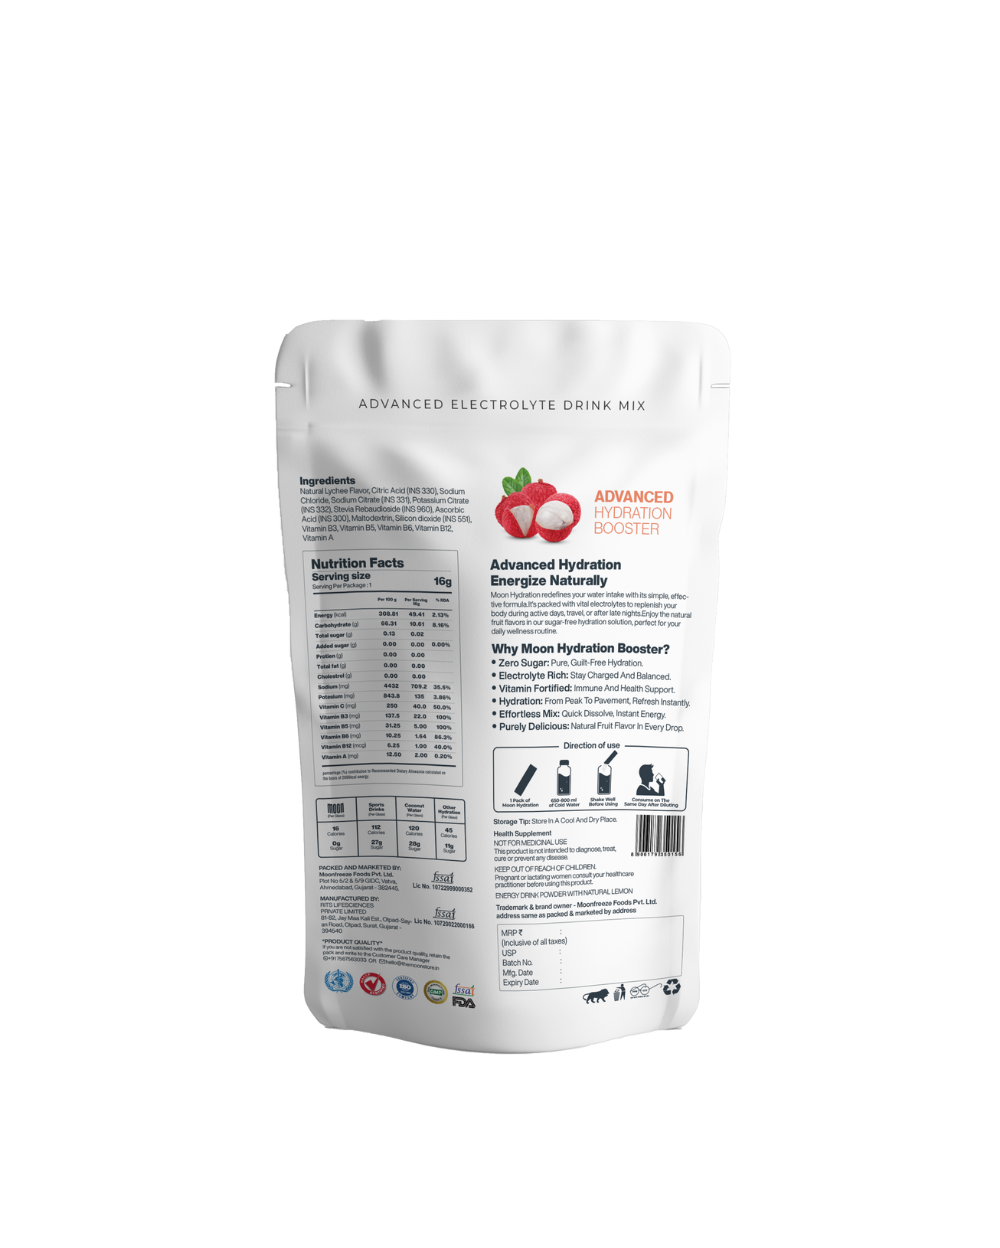 Package of Moon Lunar Strawberry + Lychee Hydration Booster, with nutritional information and usage instructions for wellness-focused hydration booster, by MOONFREEZE FOODS PRIVATE LIMITED.